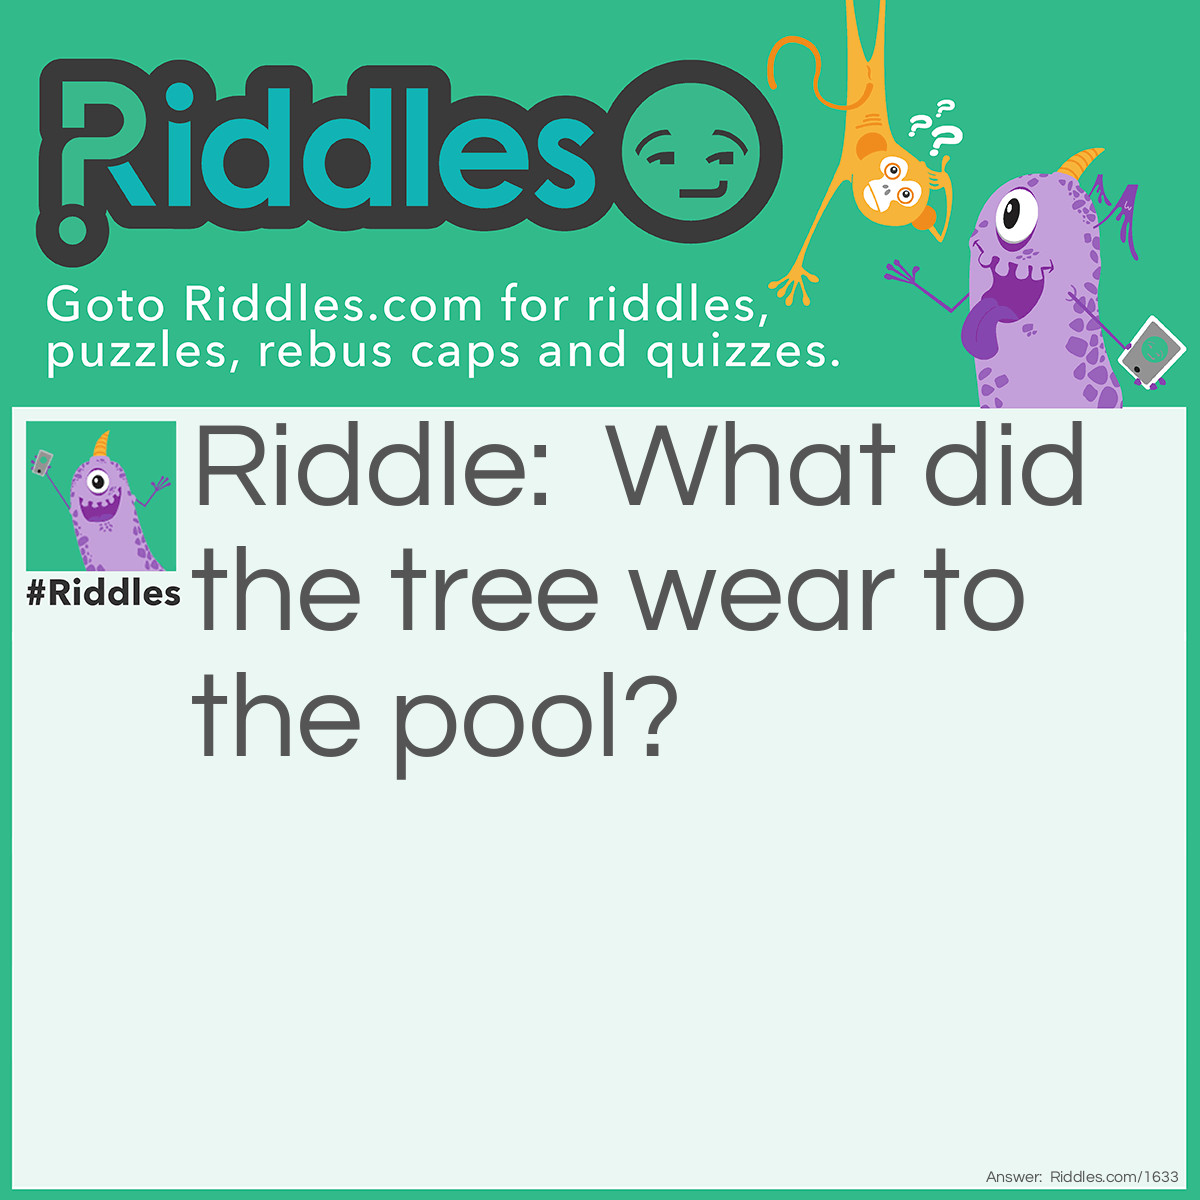 Riddle: What did the tree wear to the pool? Answer: Swim trunks!